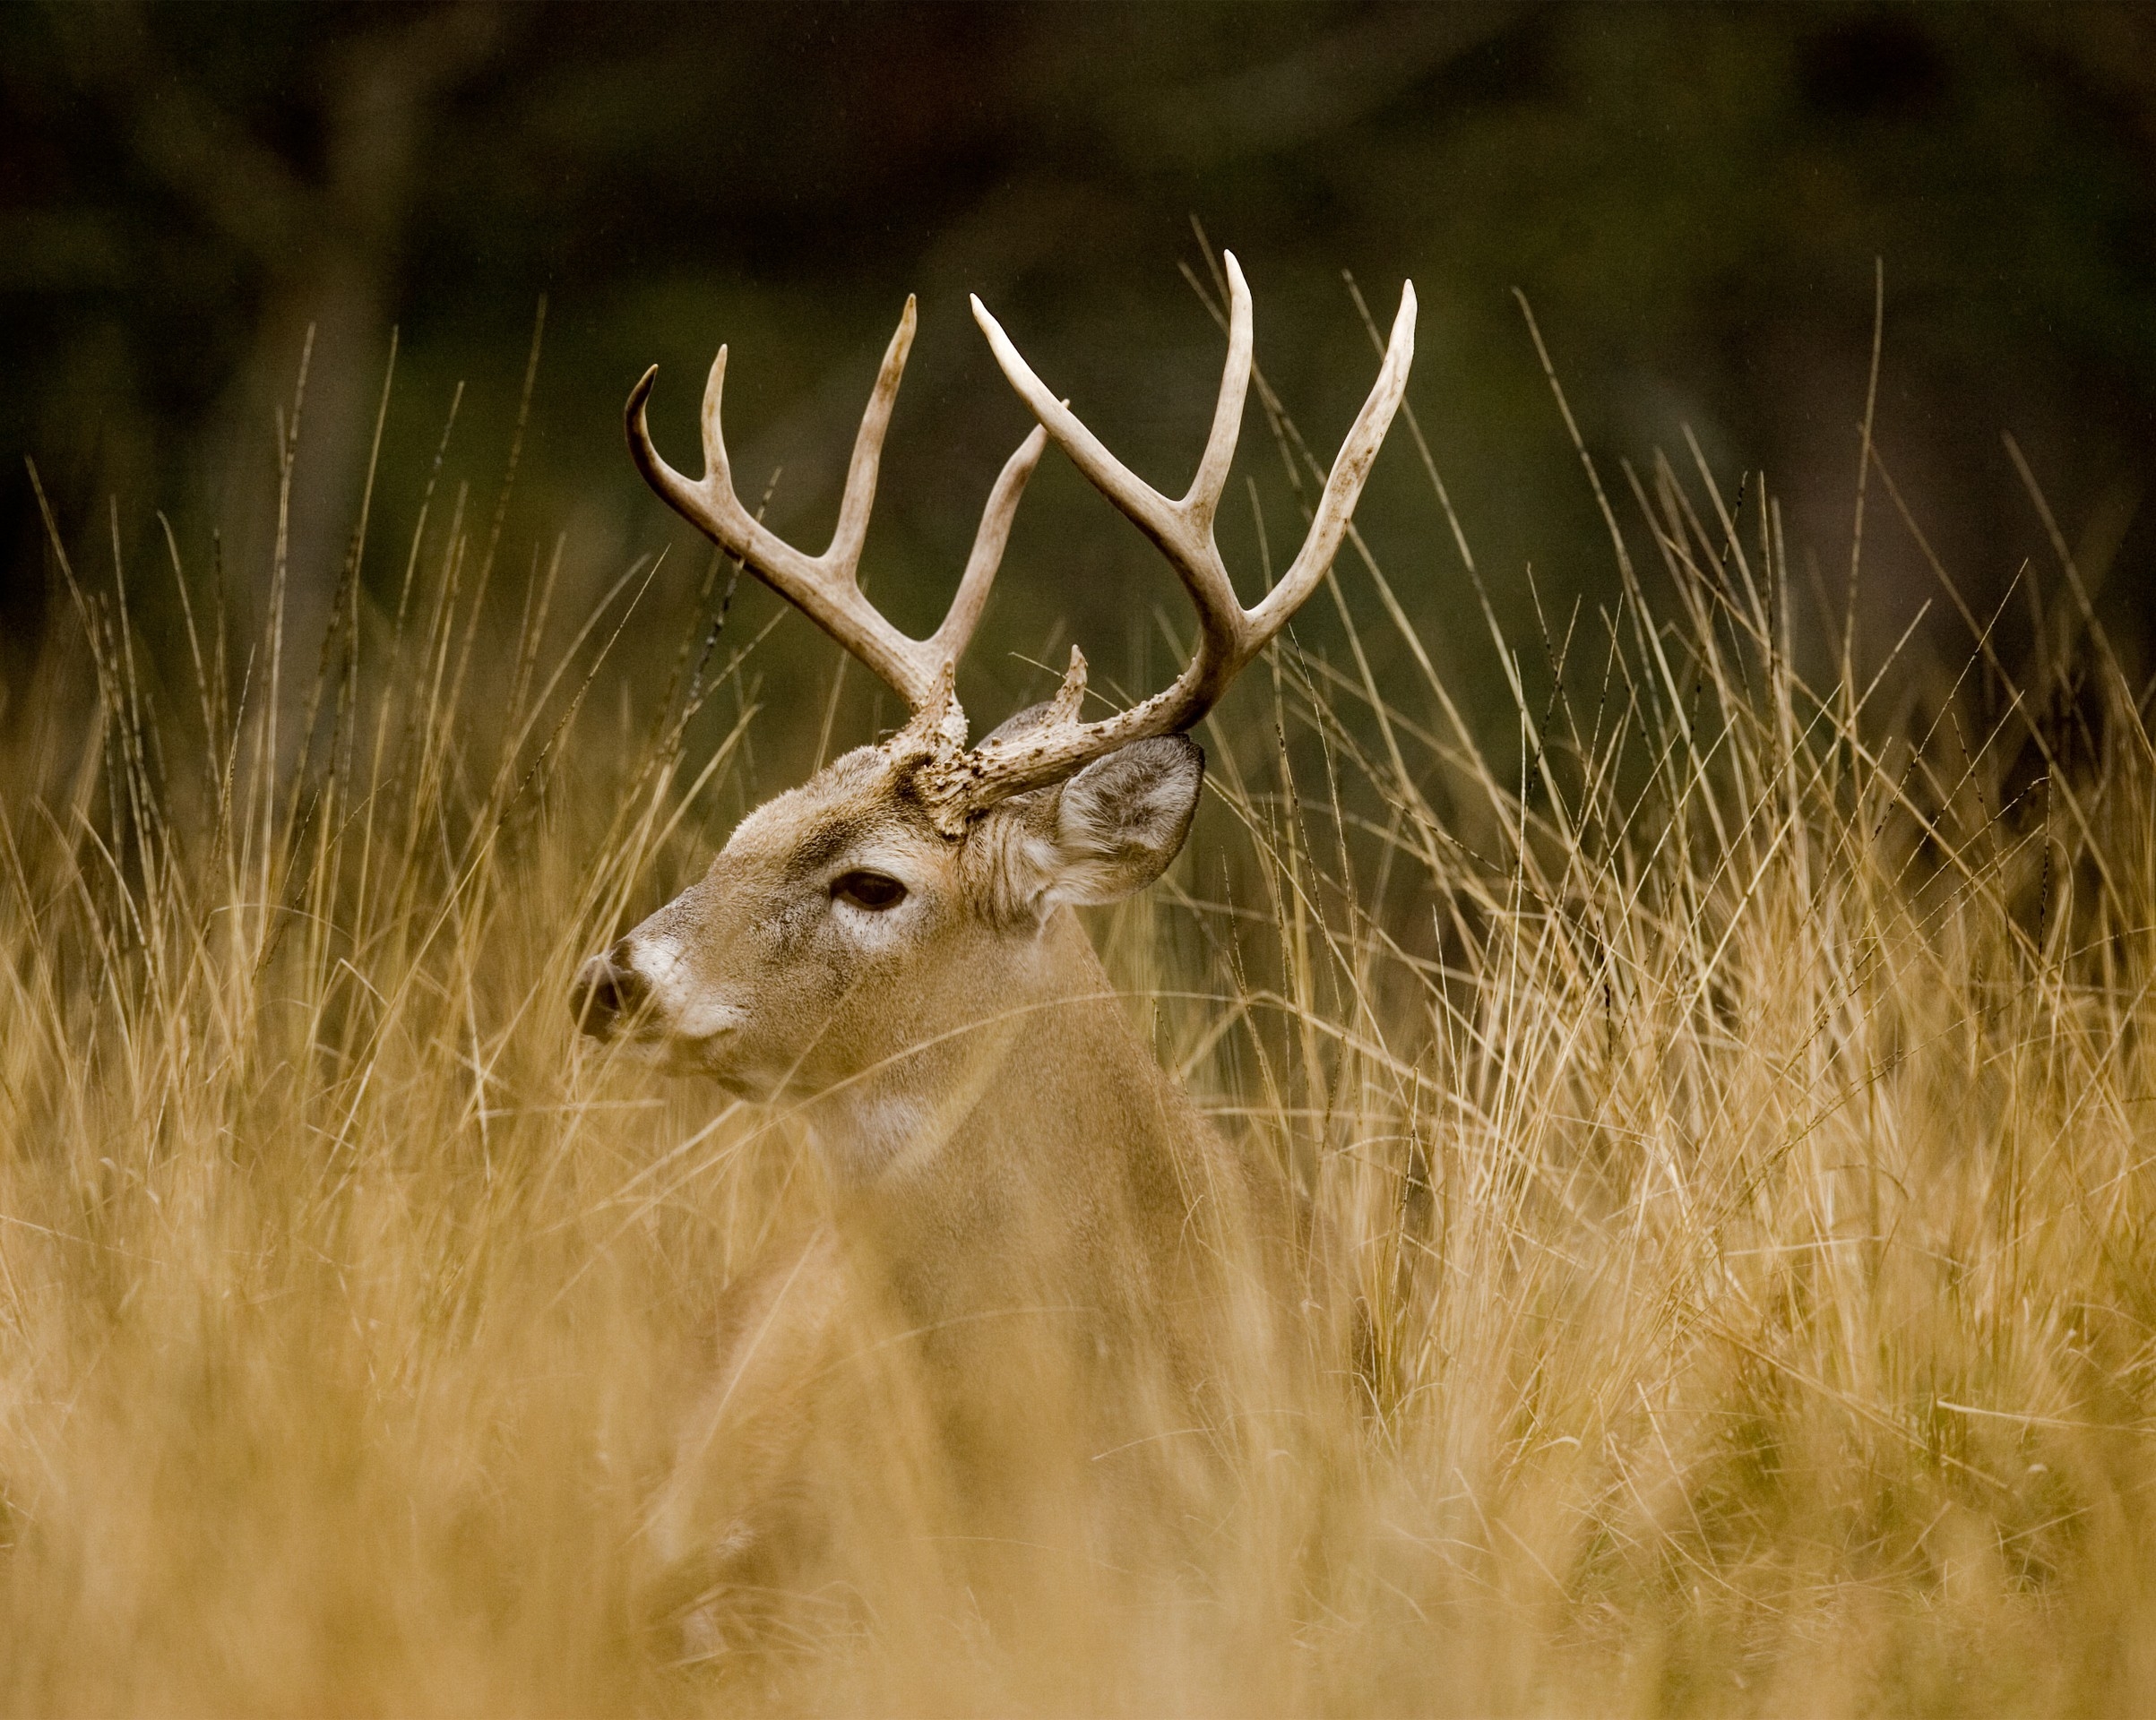 Hunting Season Dates Announced For 2020-2021 | Outdoor Alabama-Indiana 2021 Whitetailed Deer Rut Date